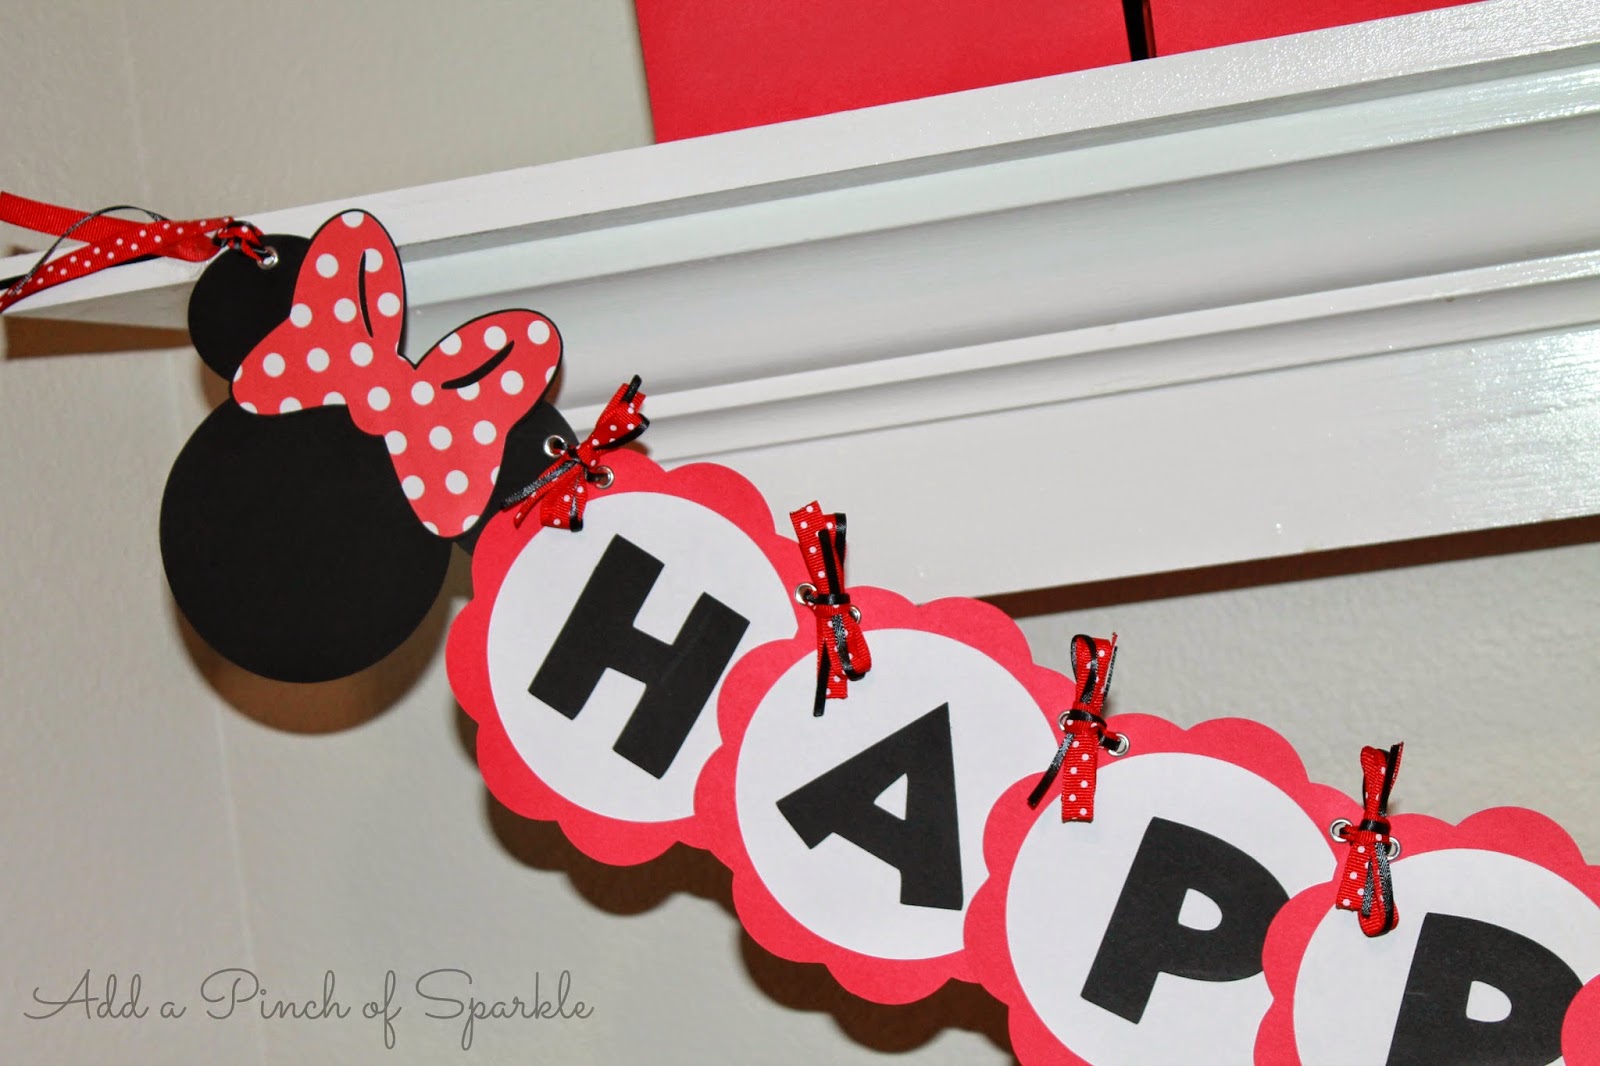 add-a-pinch-of-sparkle-minnie-mouse-birthday-banner